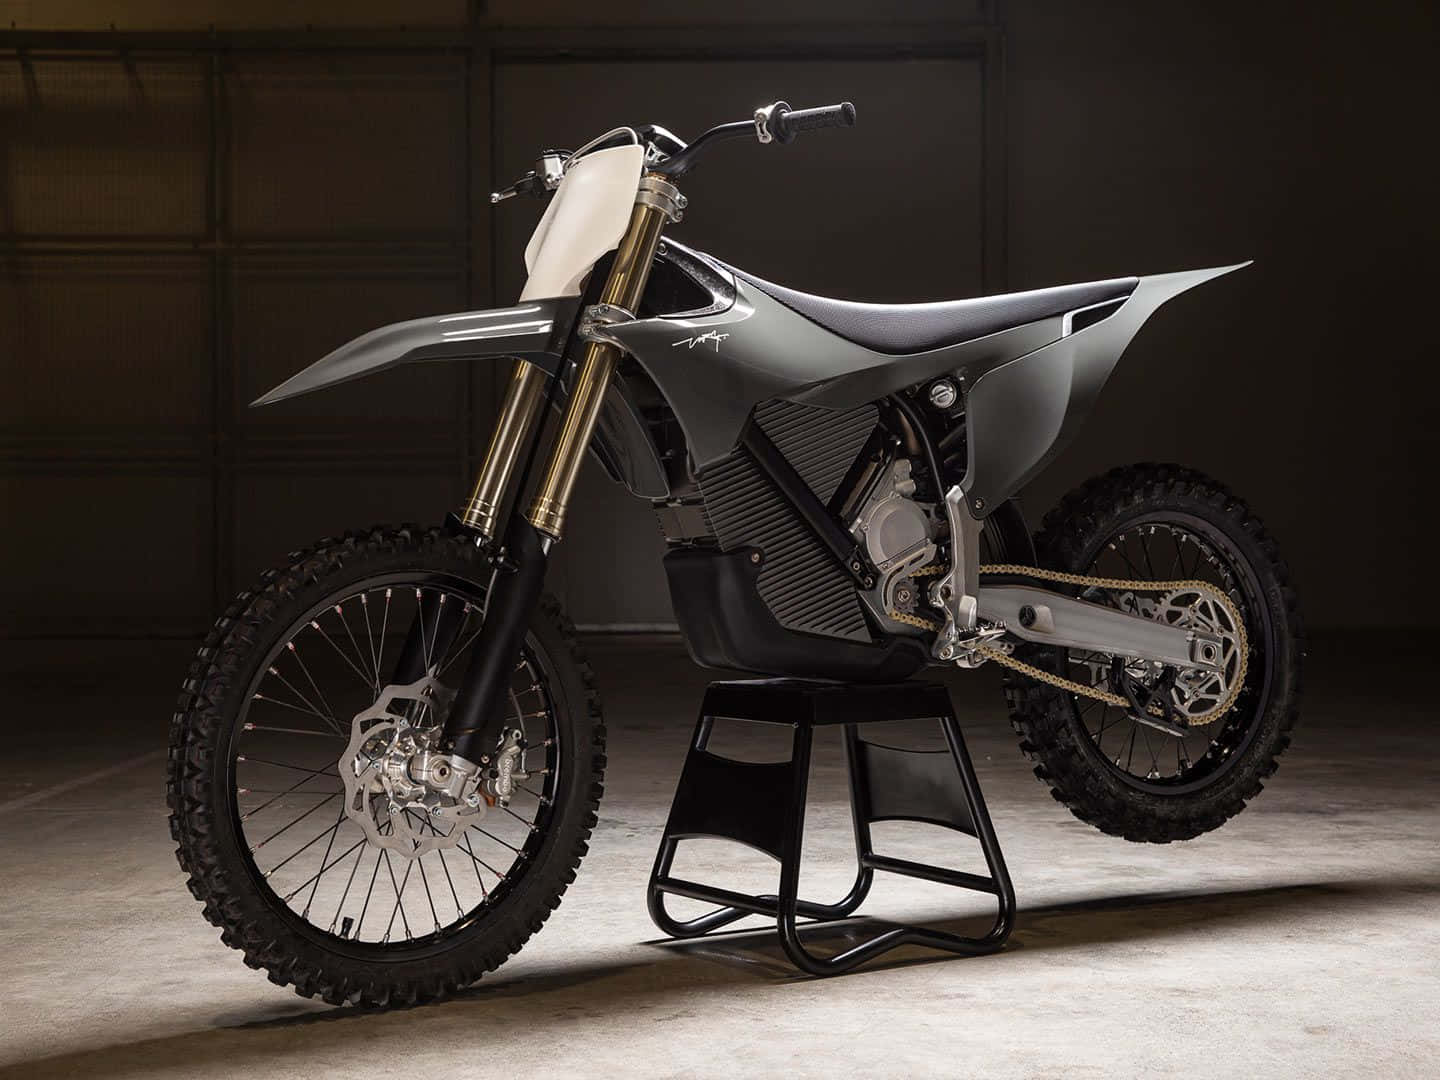 A Dirt Bike Is Sitting On A Stand In A Garage